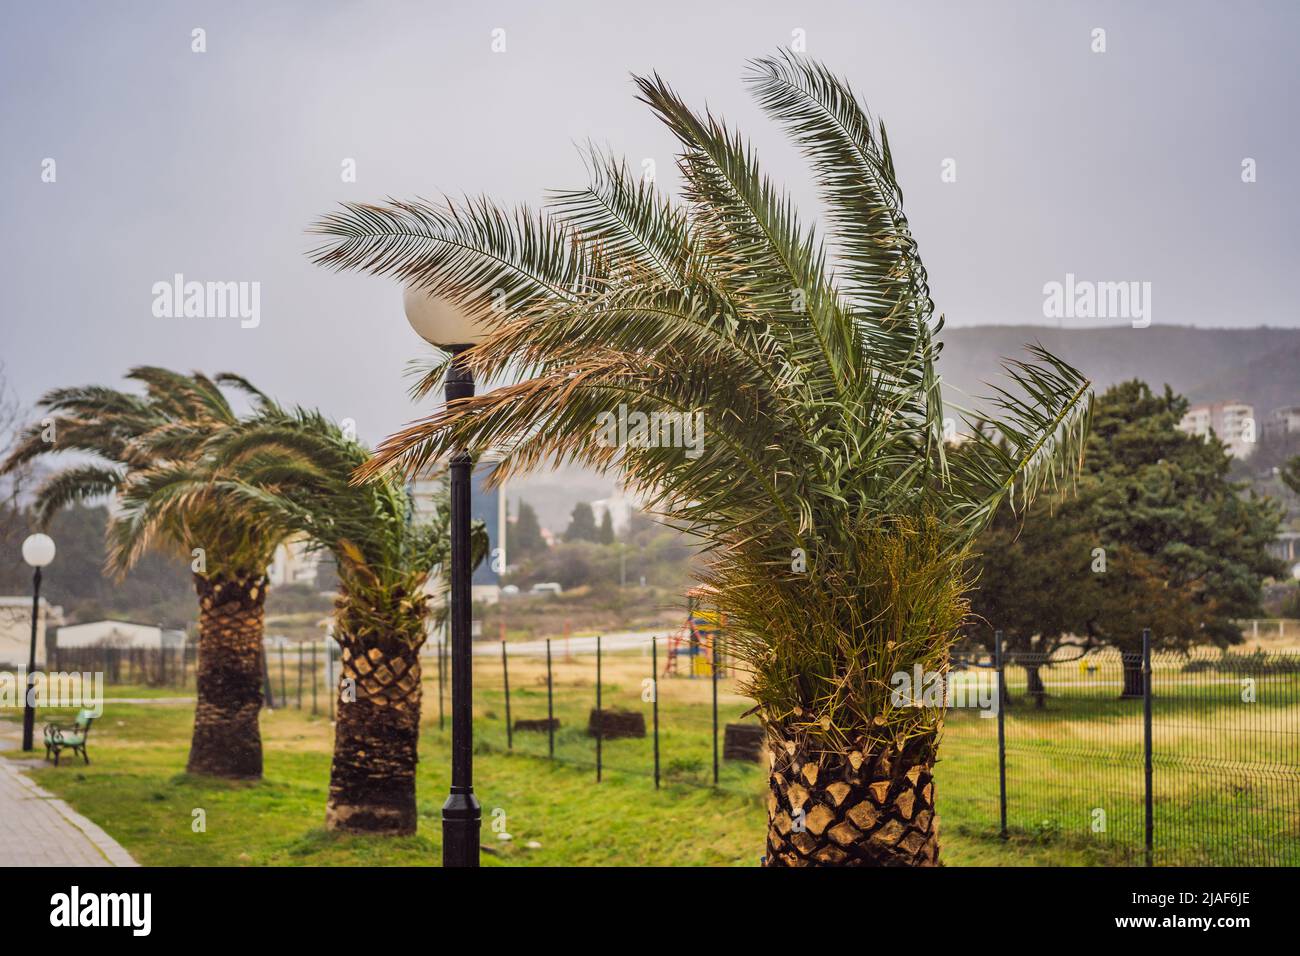 Tropical storm, heavy rain and high winds in tropical climates. Palm trees swaying in the wind from a tropical storm Stock Photo